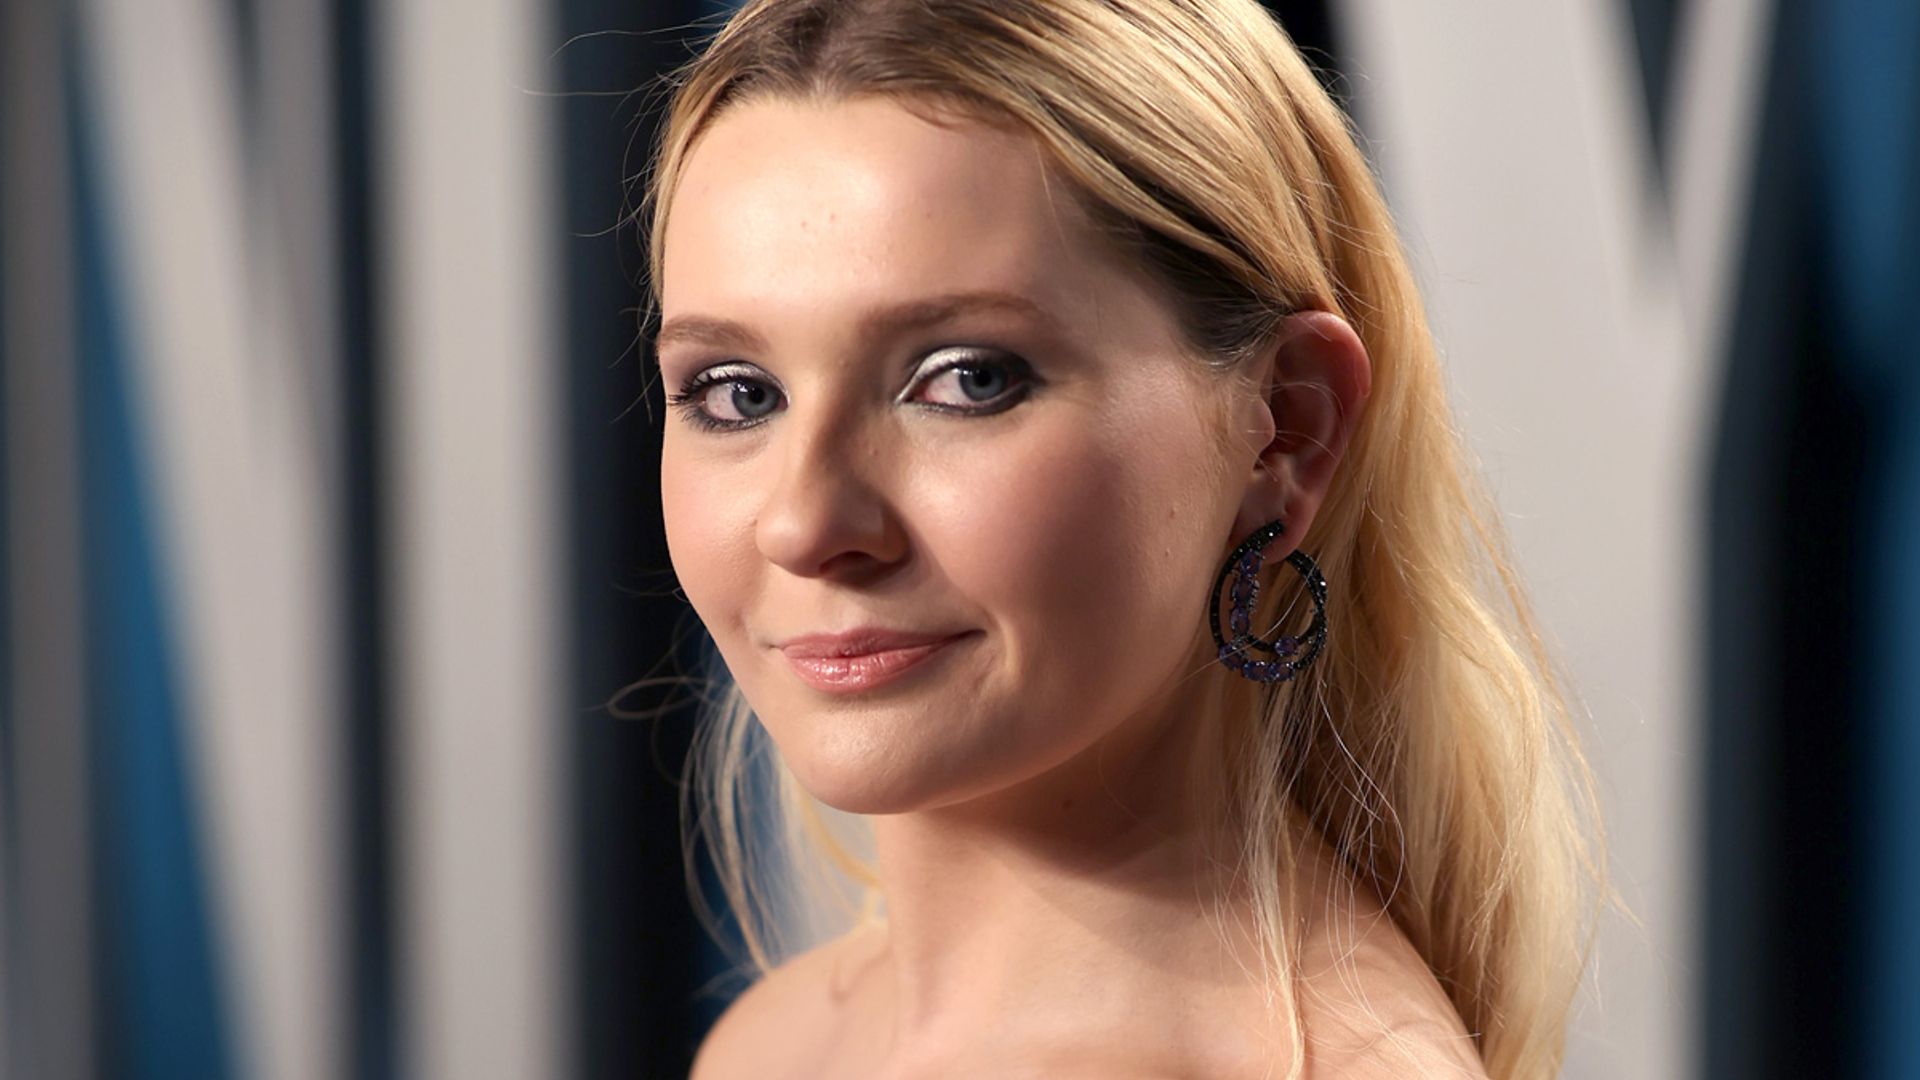 Little Miss Sunshine's Abigail Breslin's low-cut wedding dress has fans saying the same thing